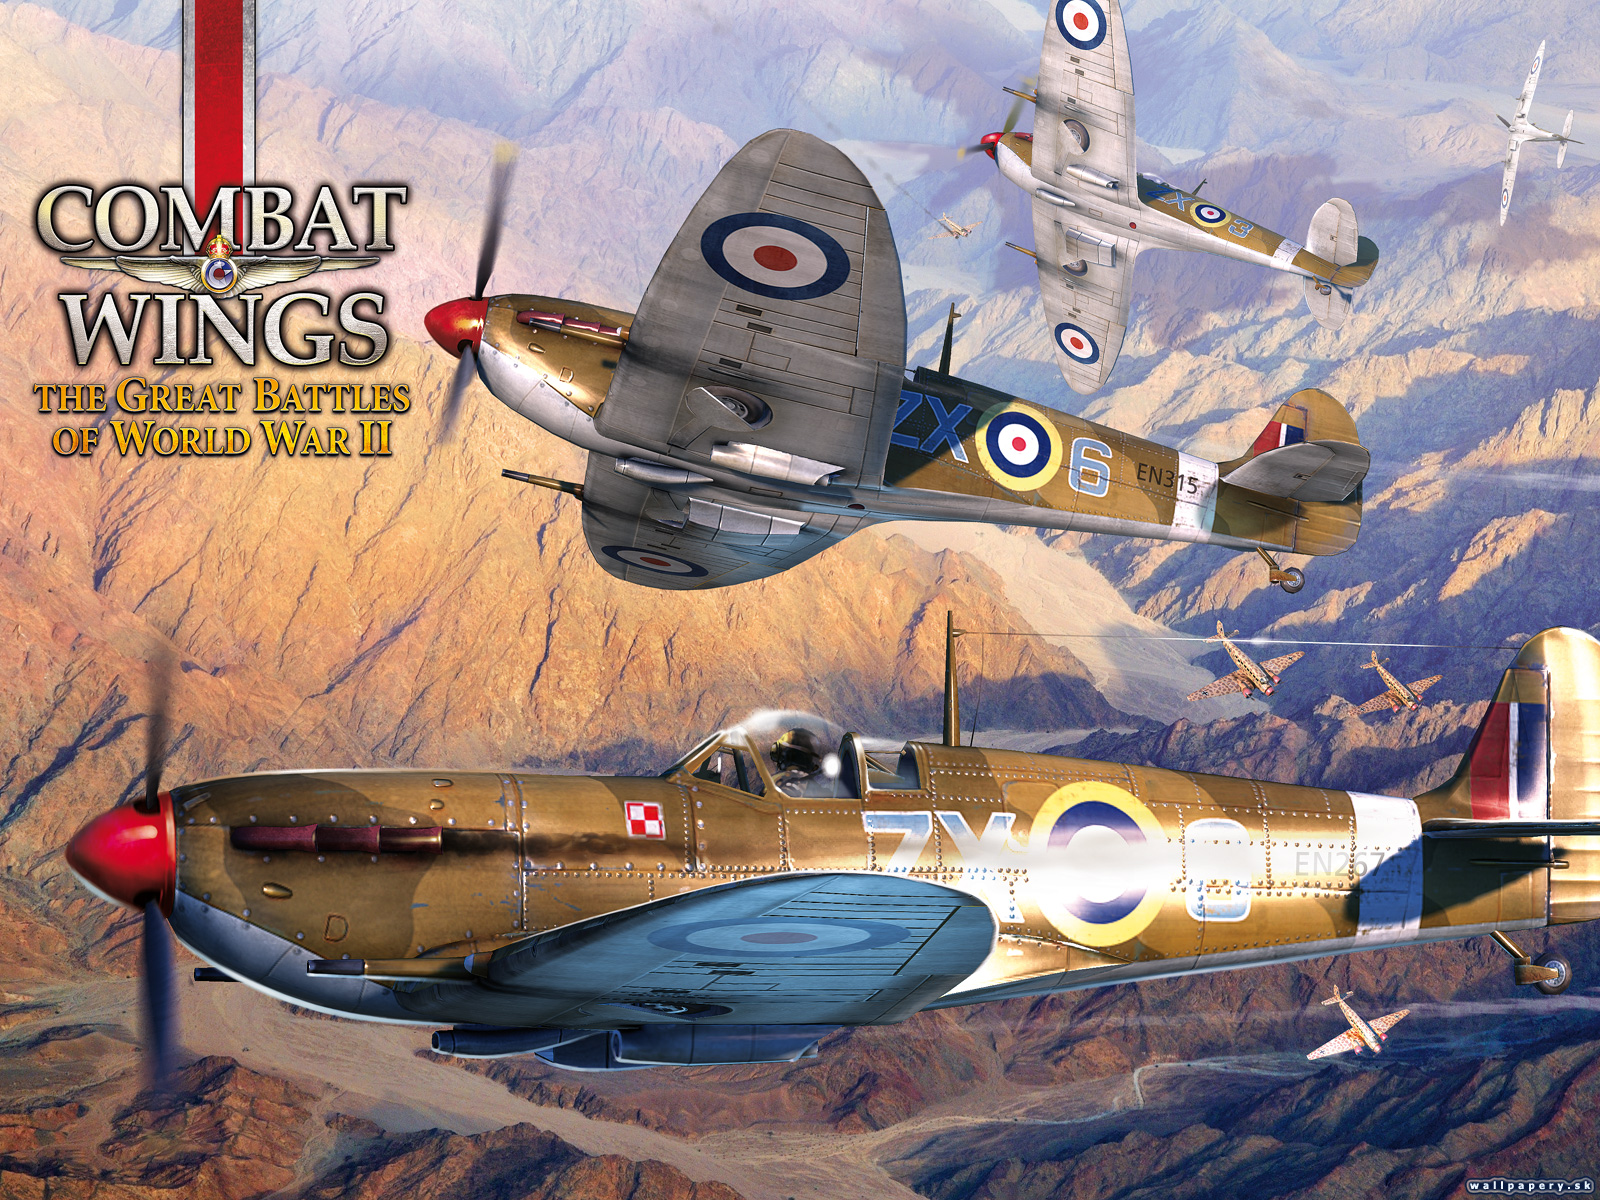 Combat Wings: The Great Battles of WWII - wallpaper 1